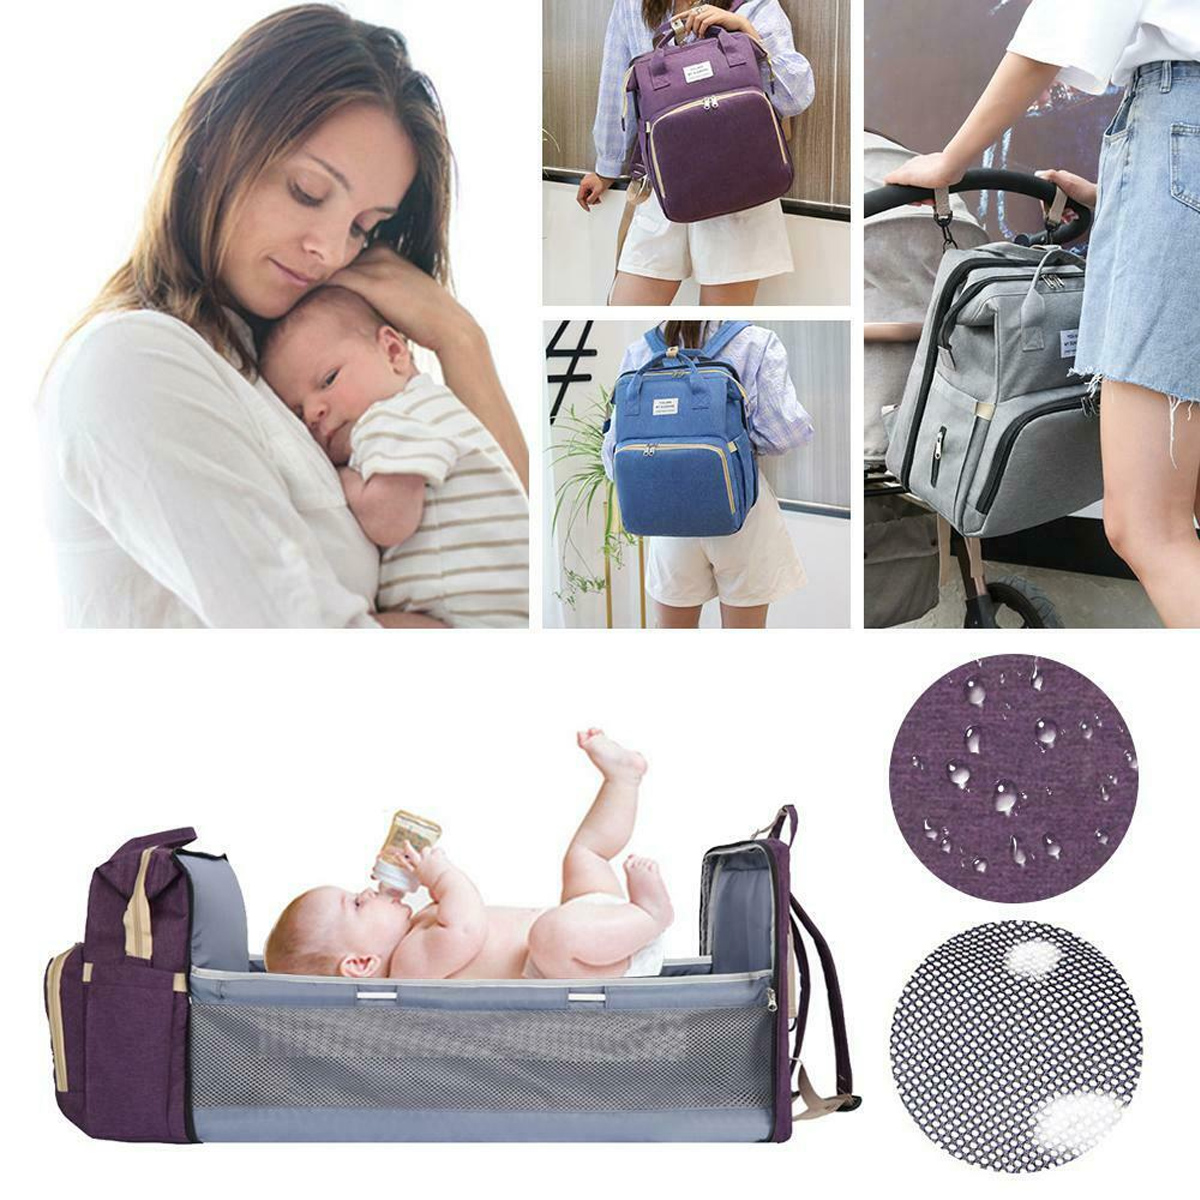 Portable-Diaper-Bag-Folding-Baby-Travel-Large-Backapack-Outdoor-Foldable-Baby-Bed-Mommy-Bags-1759461-2